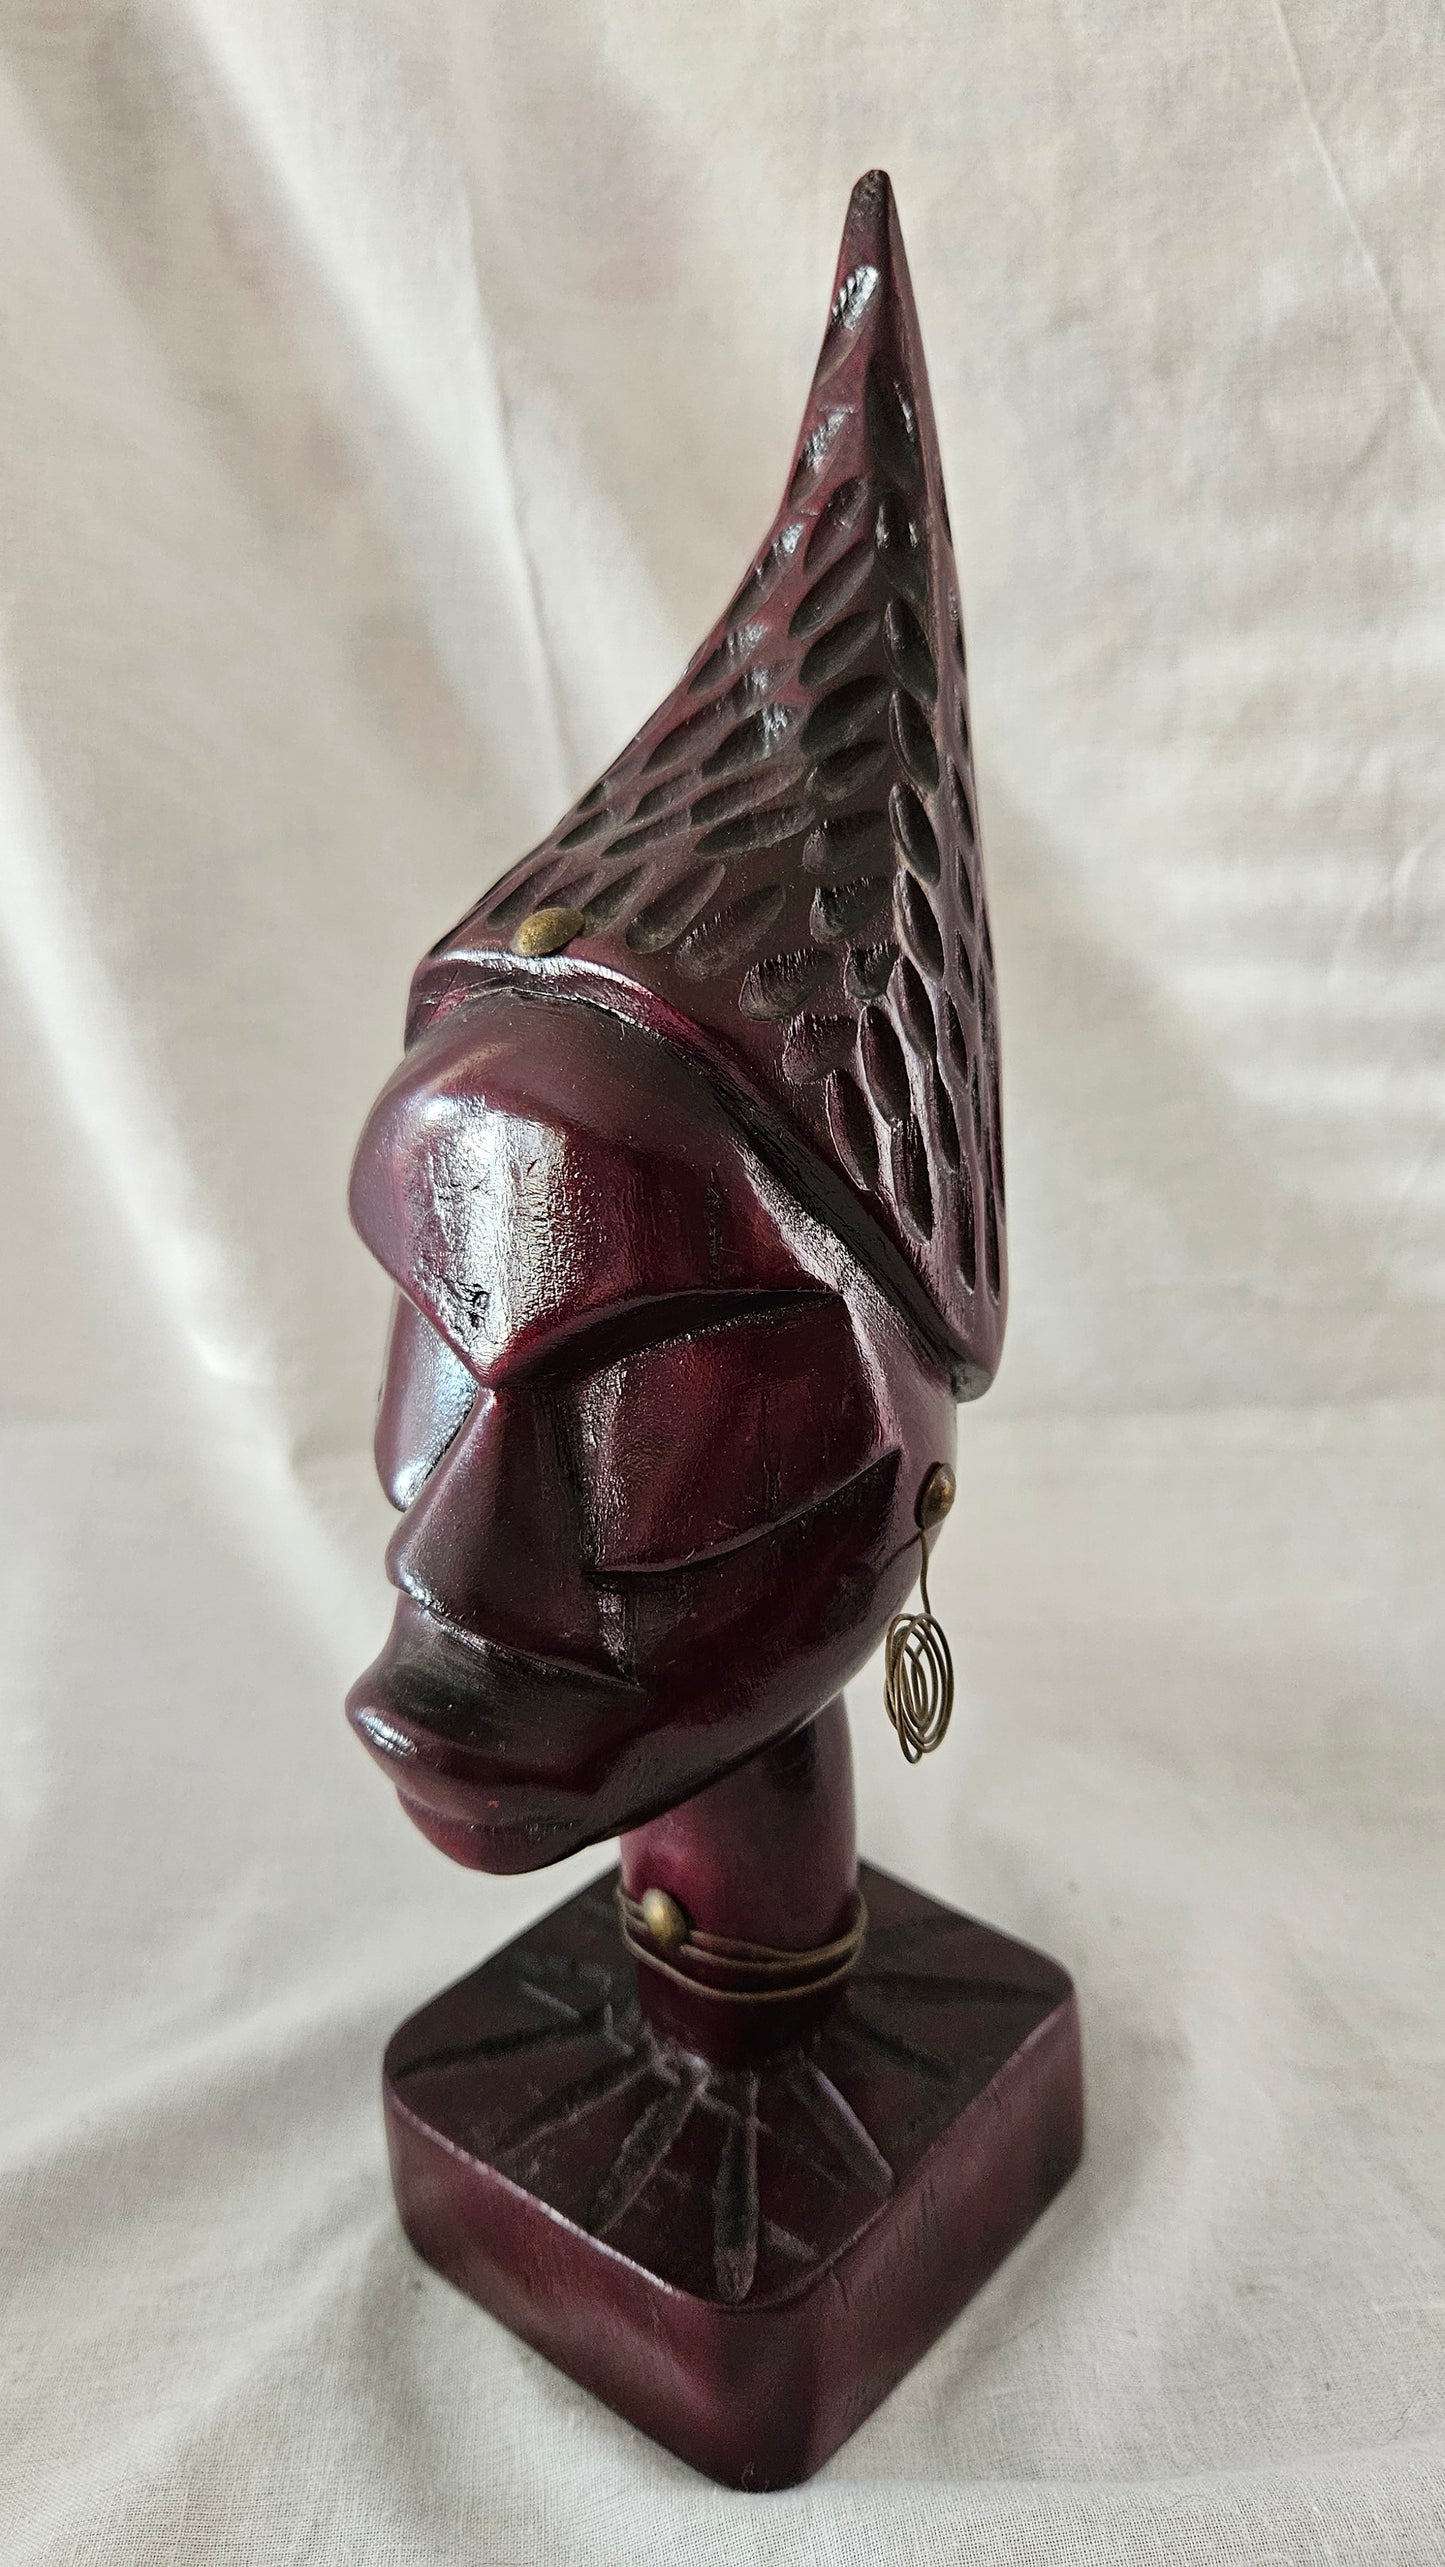 Carved Wooden African Head / Bust